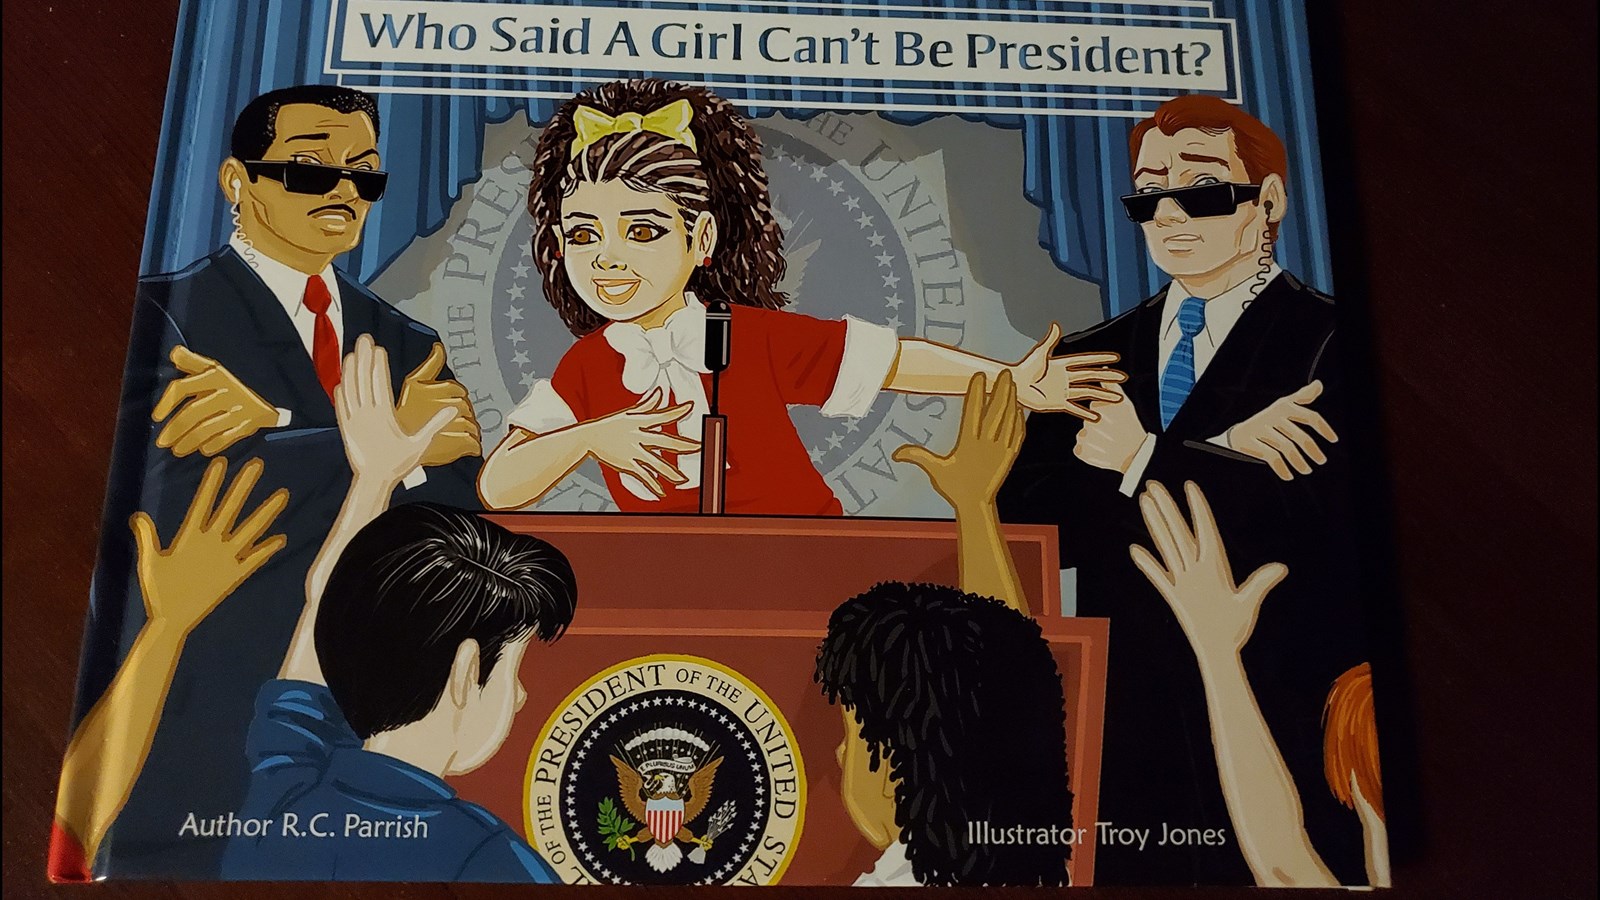 Who Says a Girl Can't Be President?